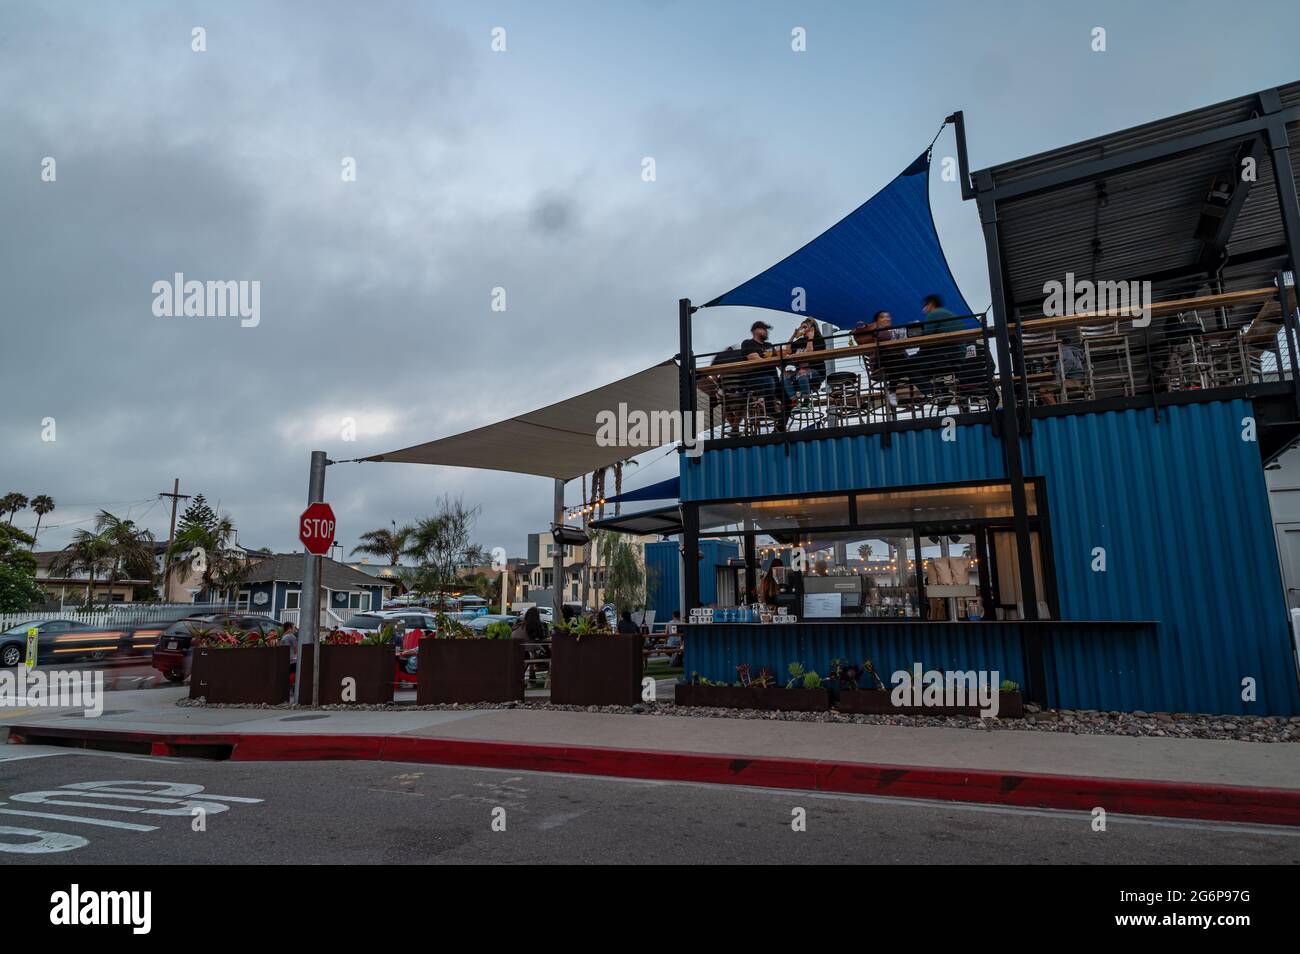 People hang out at busy outdoor restaurant Stock Photo